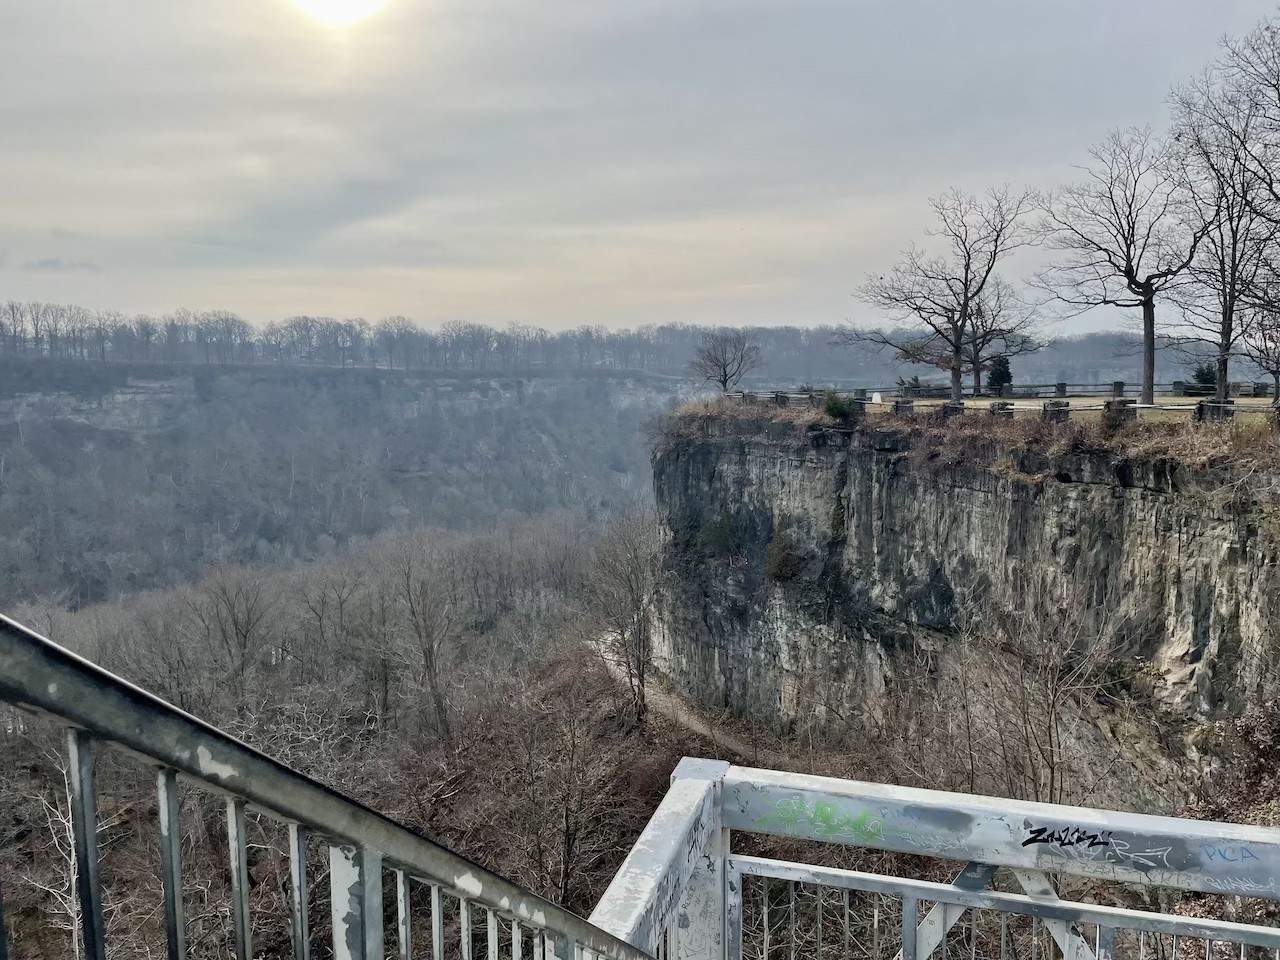 Niagara Glen Trail Staircase  - As we descended the staircase down into the Niagara Gorge, I stopped for a moment to admire the view from this spot. This was one of many amazing views along the Niagara Glen Trail in Niagara Falls, Ontario, Canada.